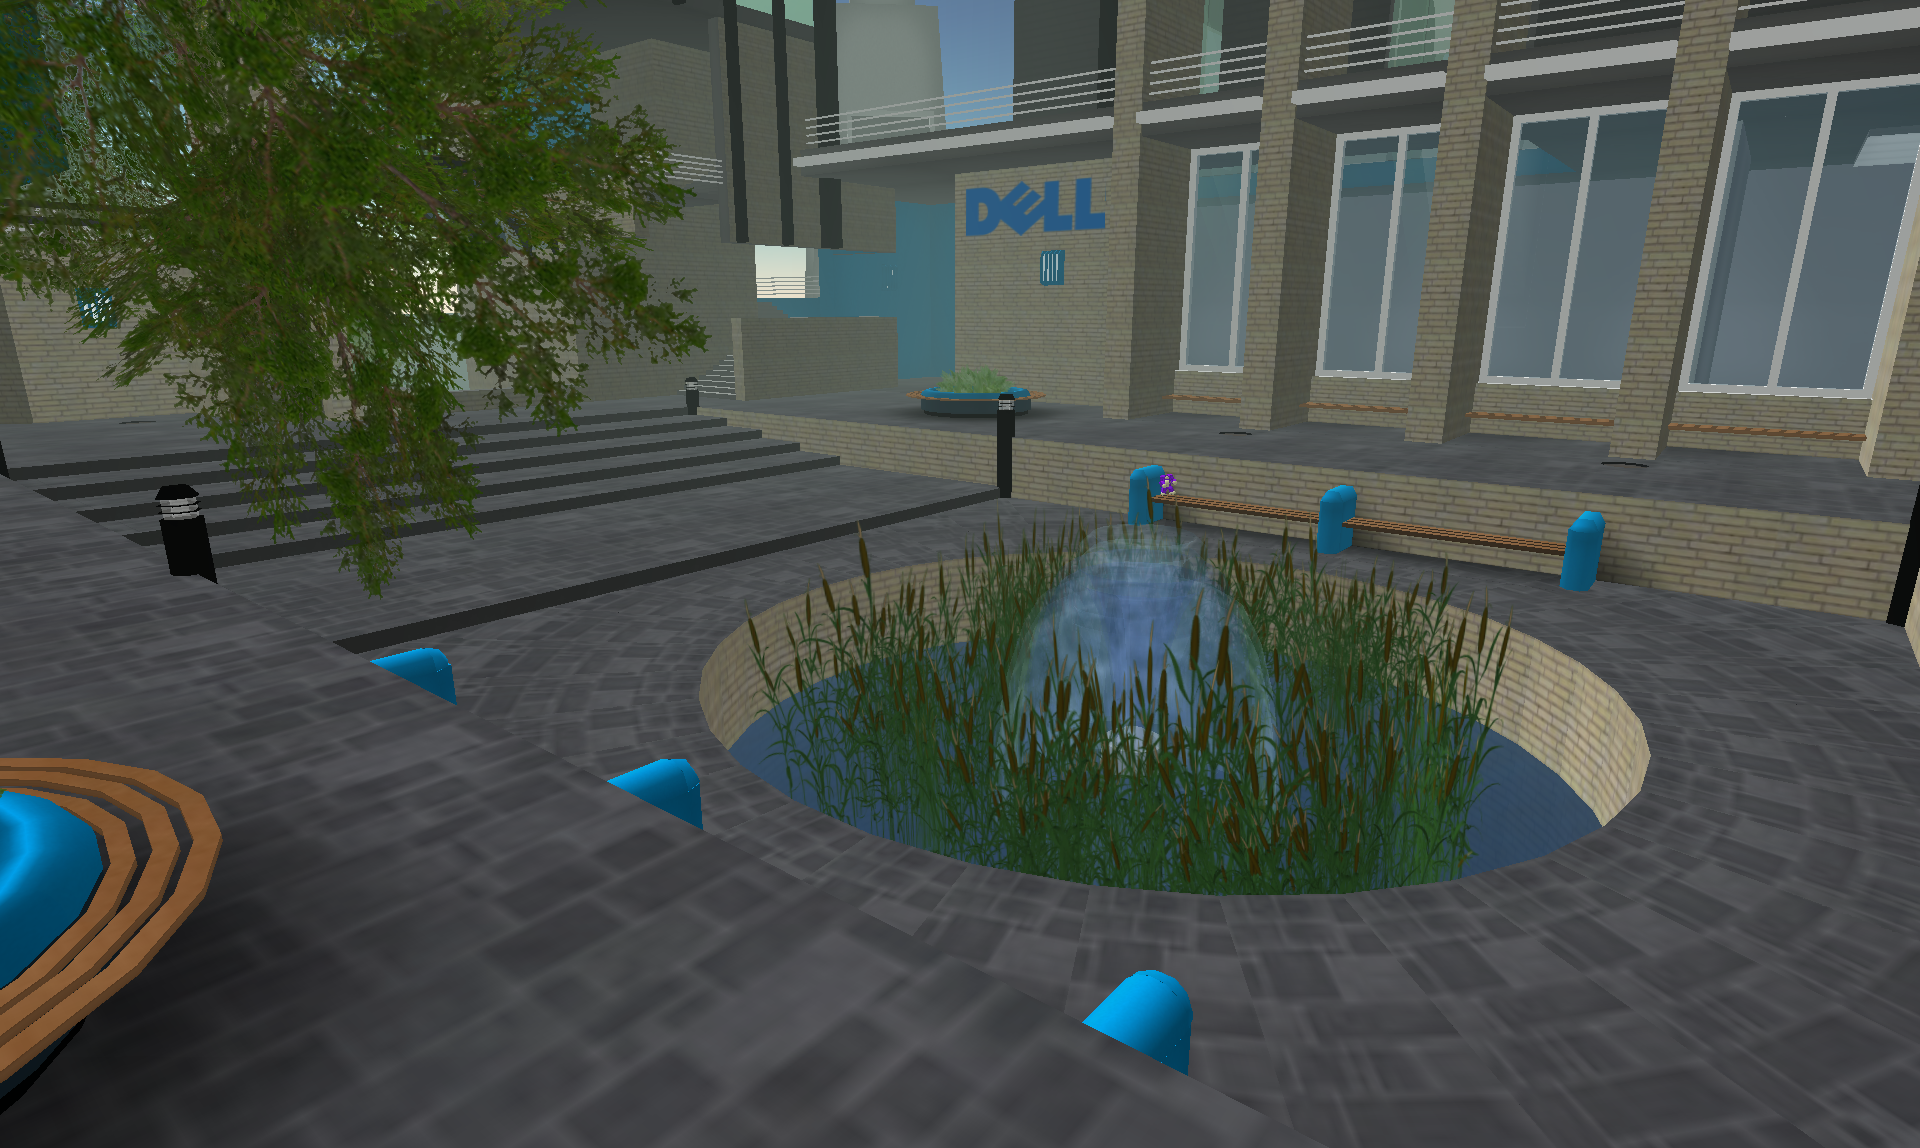 dell_009.bmp